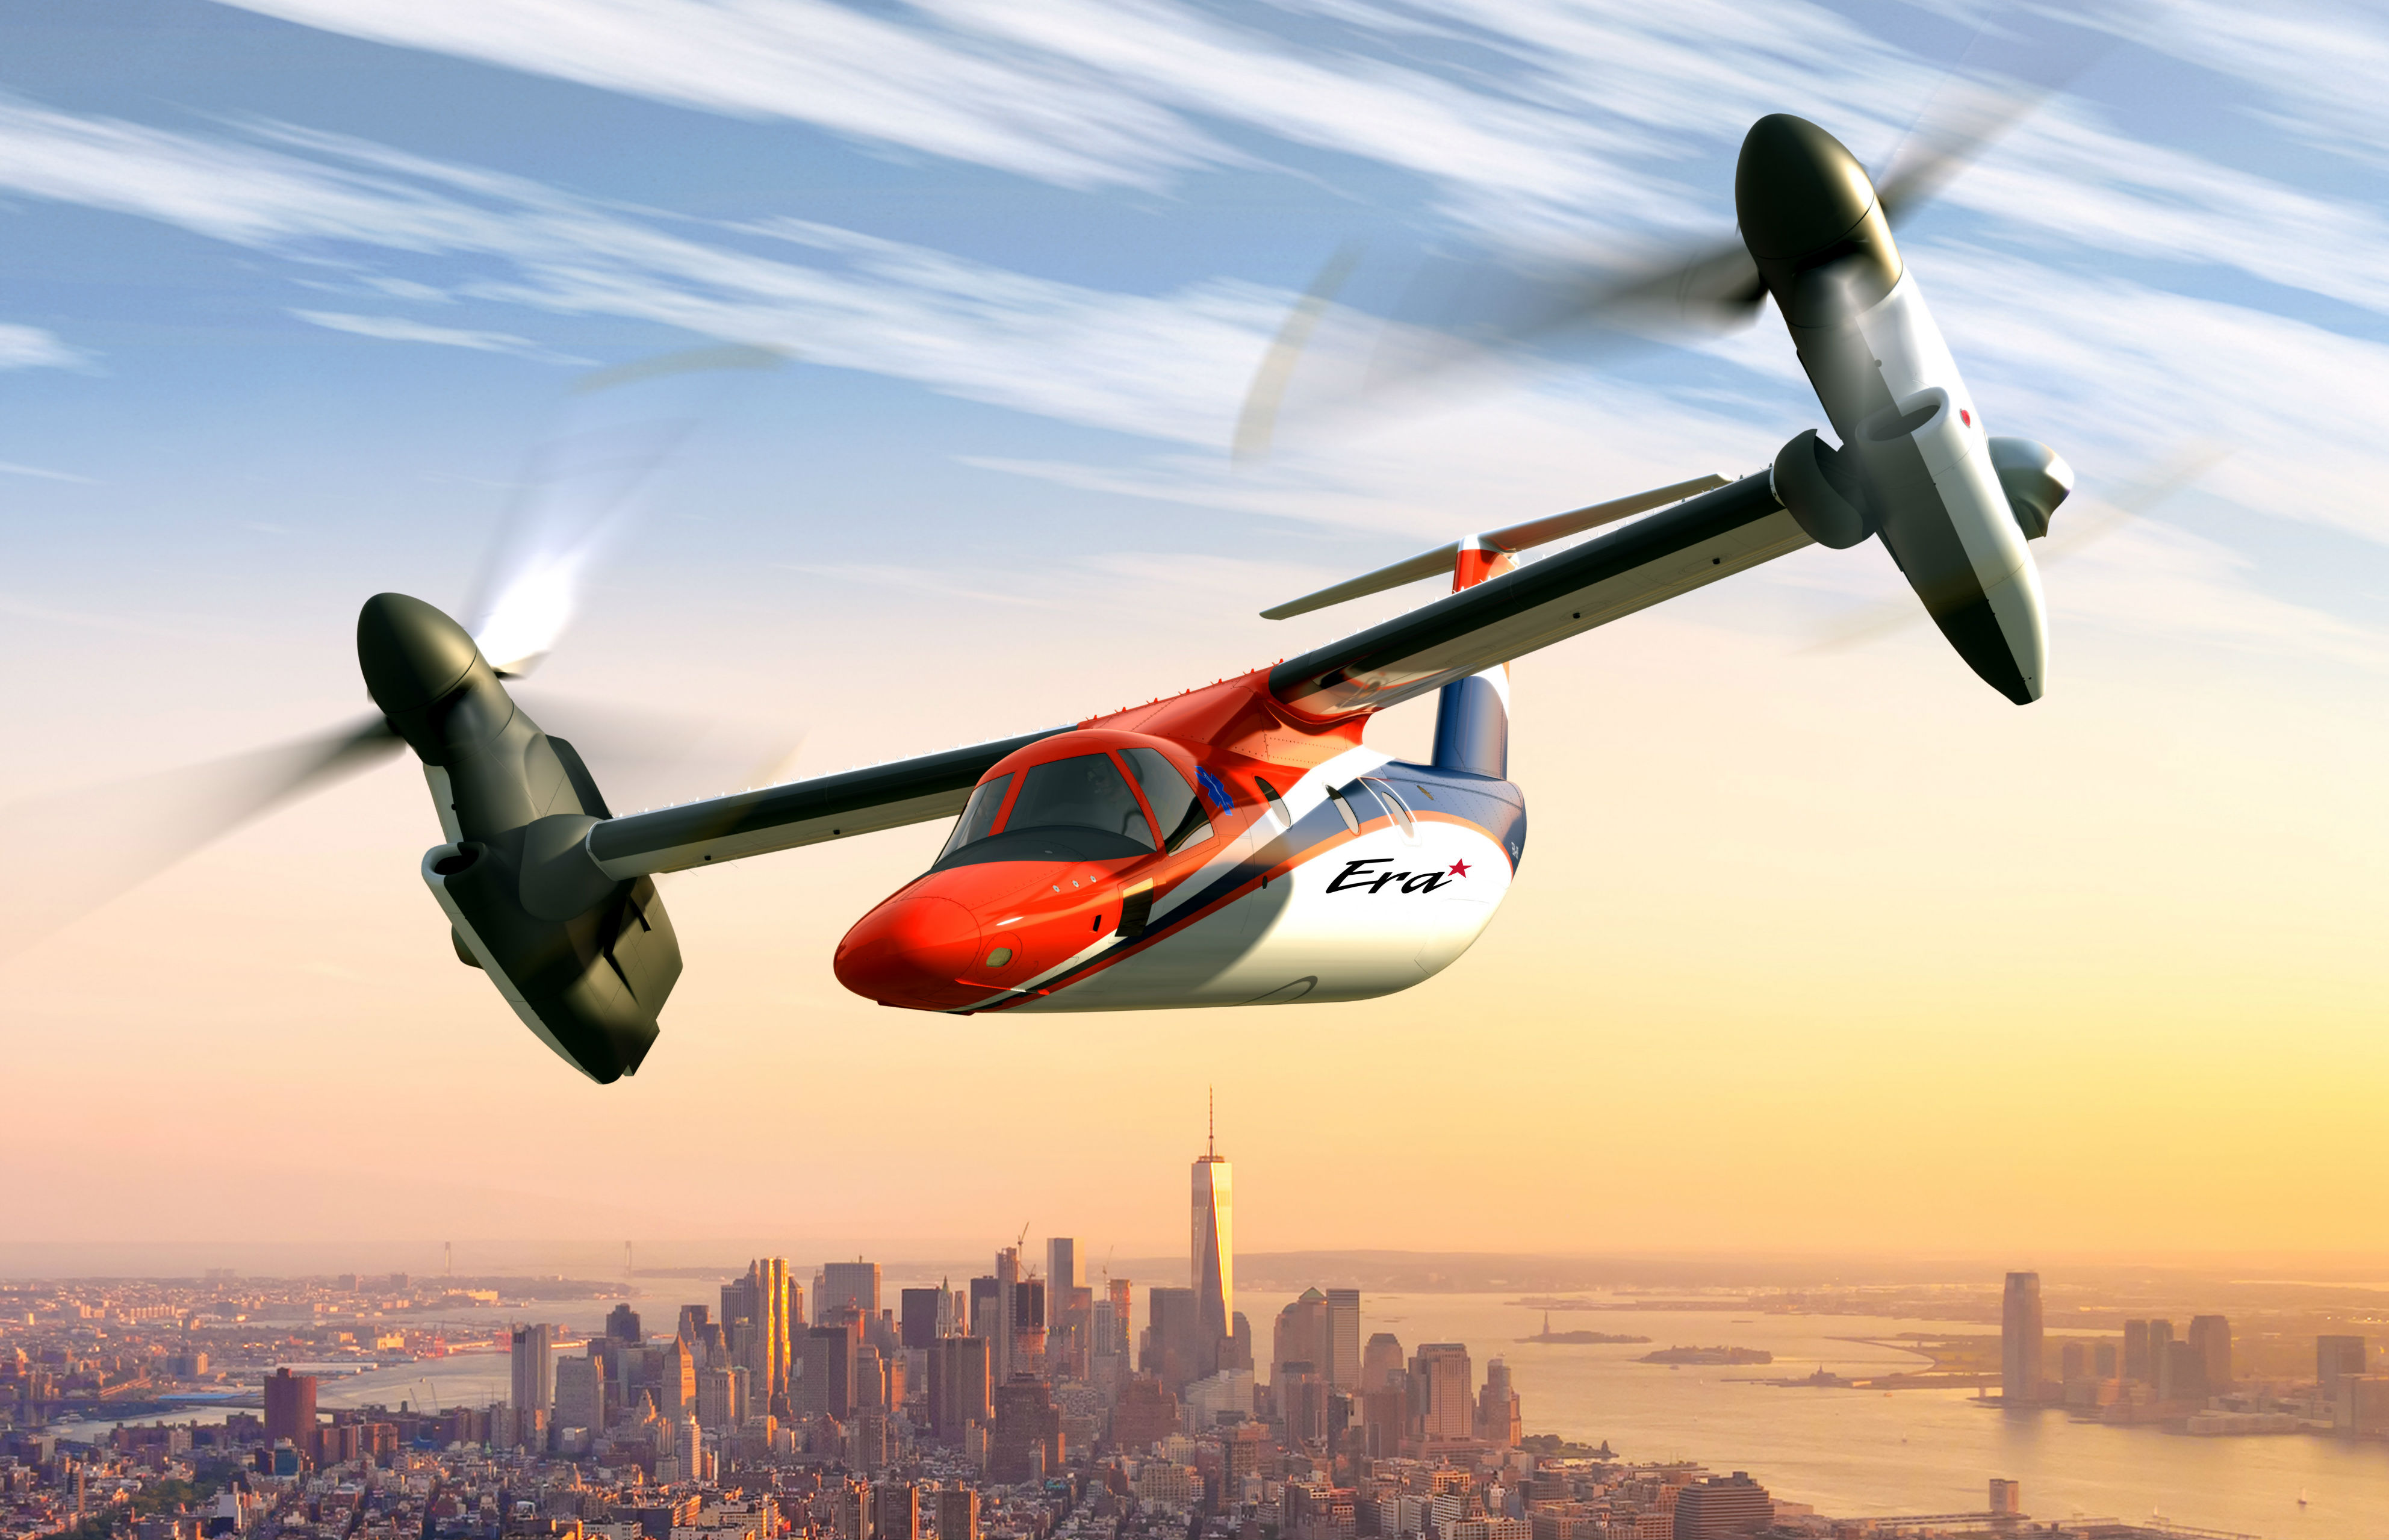 Era is to take delivery of two Leonardo AW609s, along with a training package, in 2020. Leonardo Image